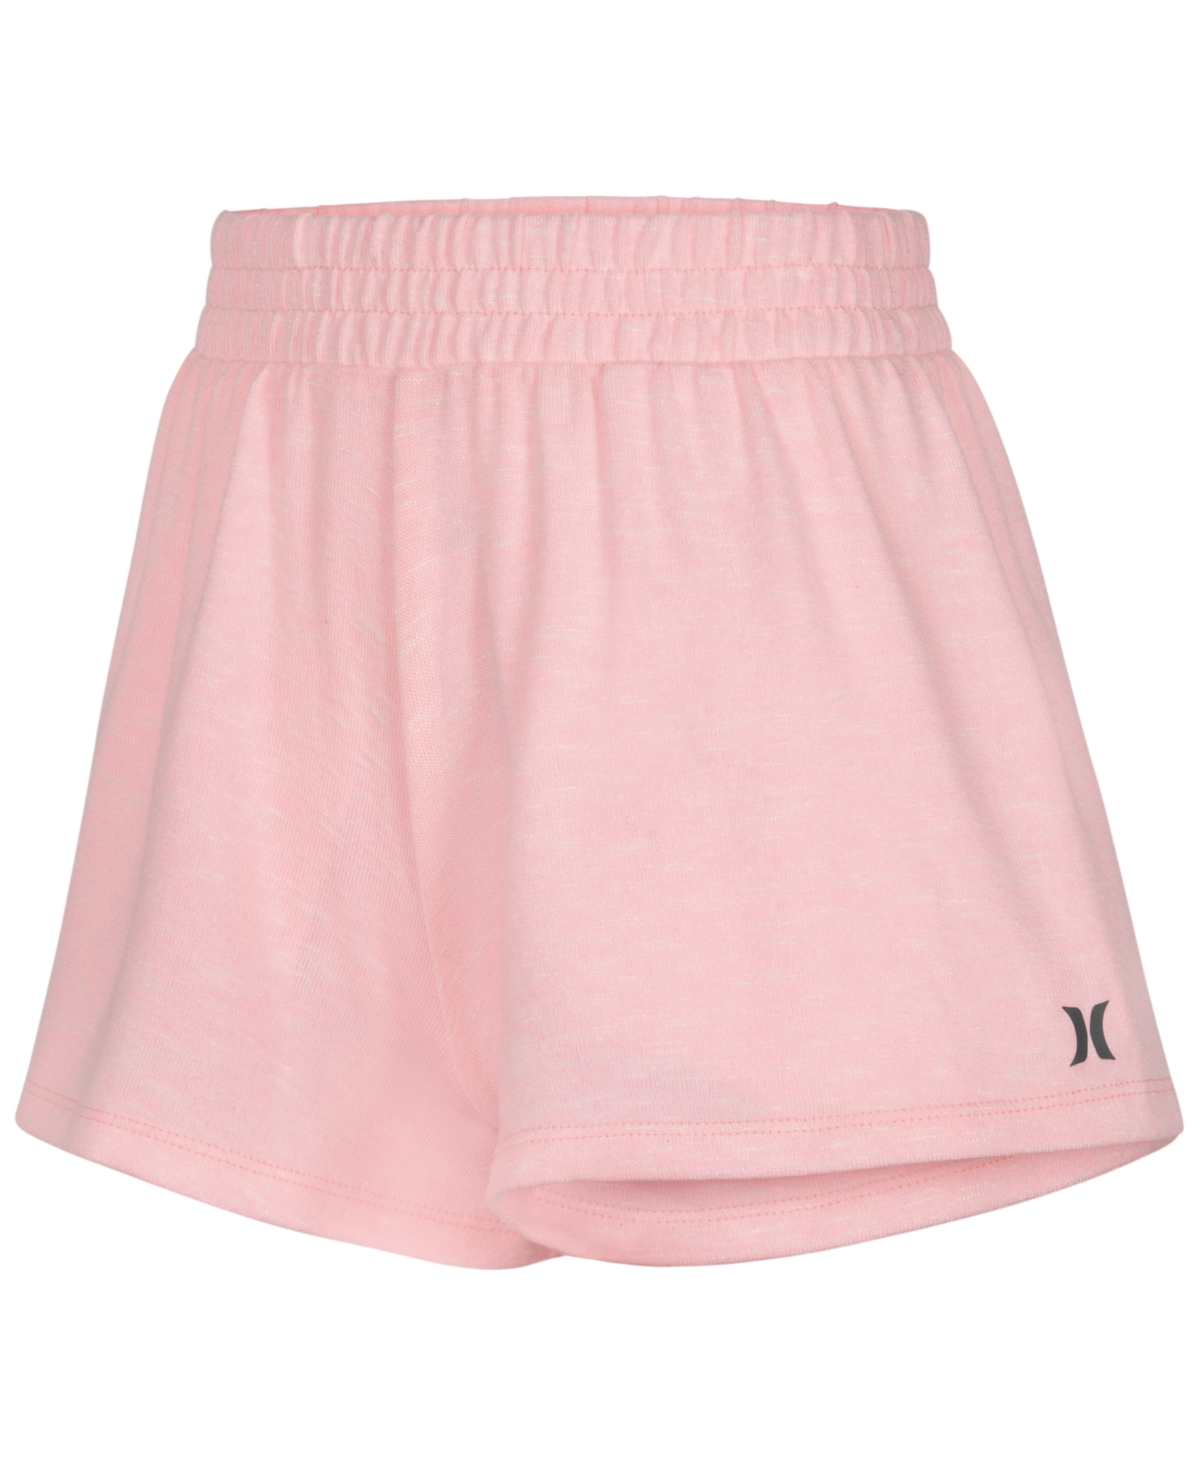 Hurley Kids' Big Girls Hacci Swing Shorts In Sunkissed Melon